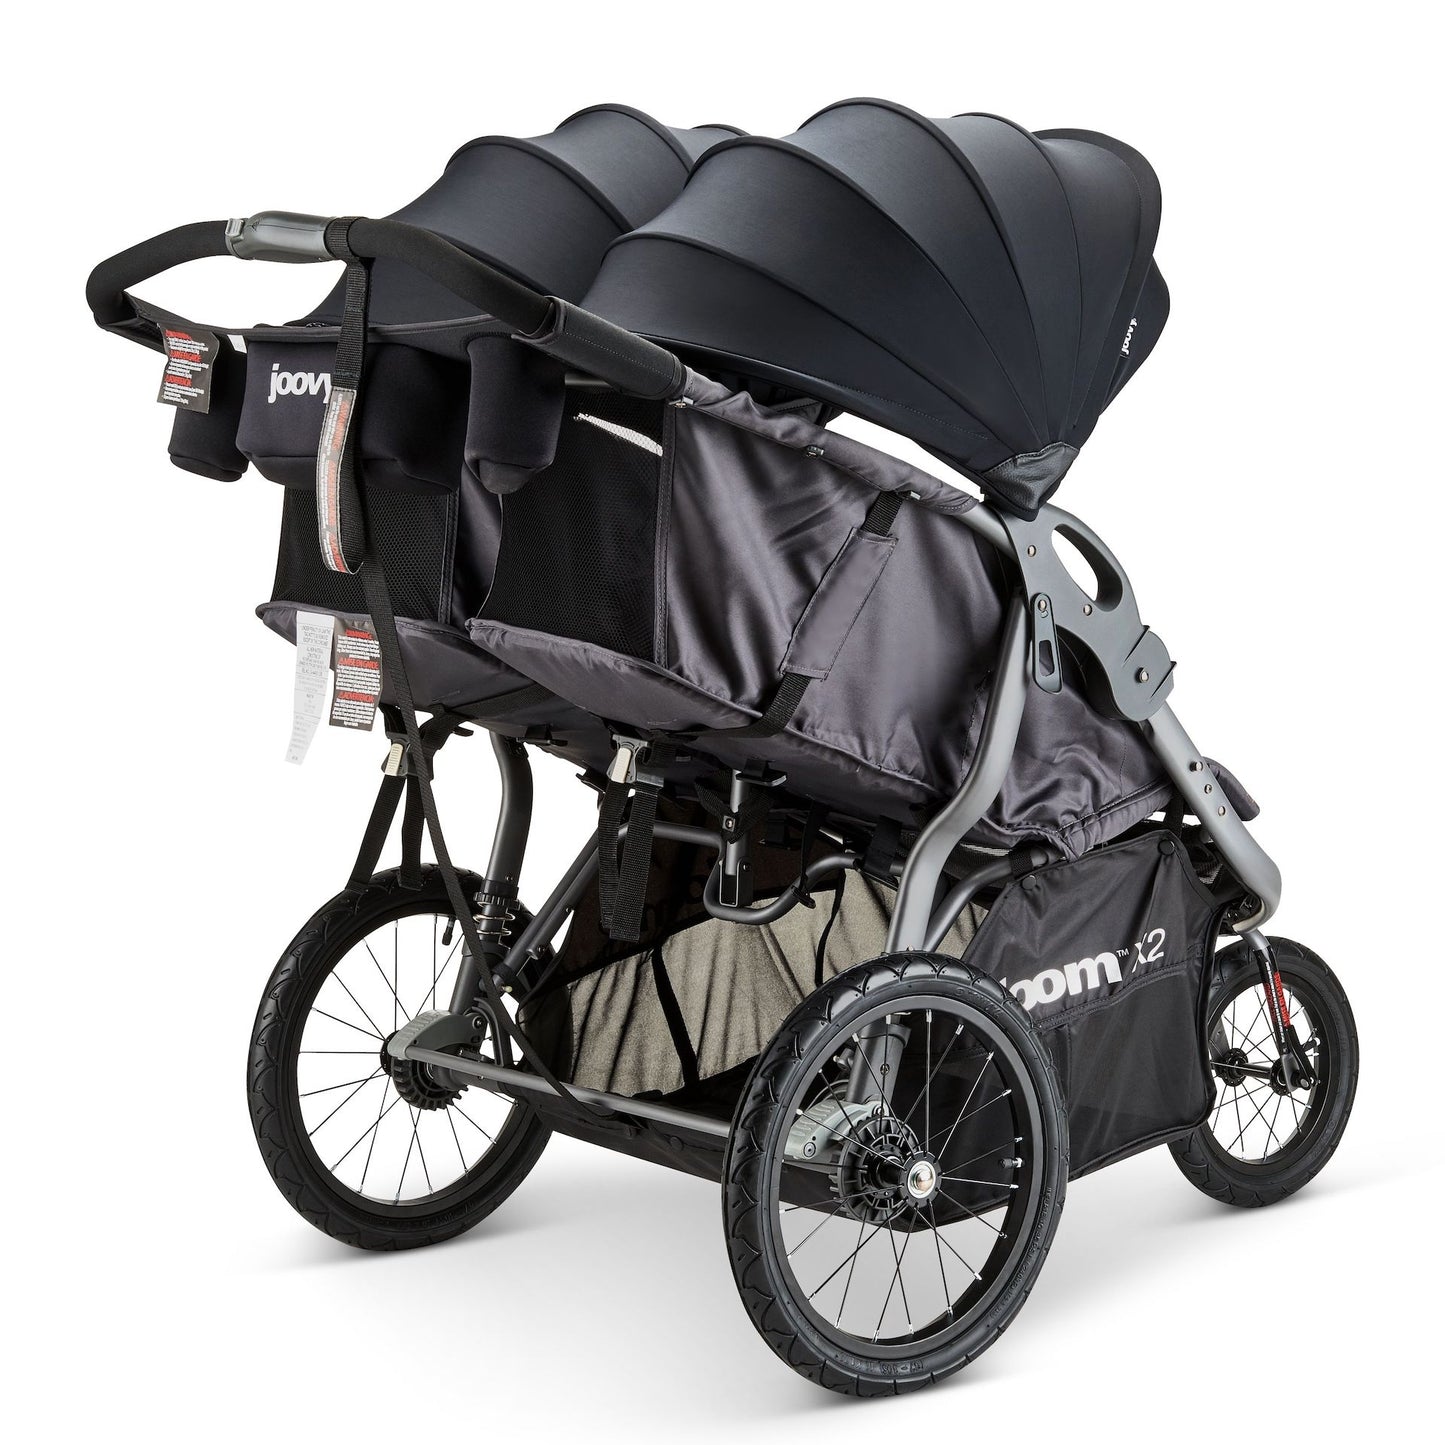 Joovy Zoom X2 Lightweight Double Jogging Stroller (Forged Iron)